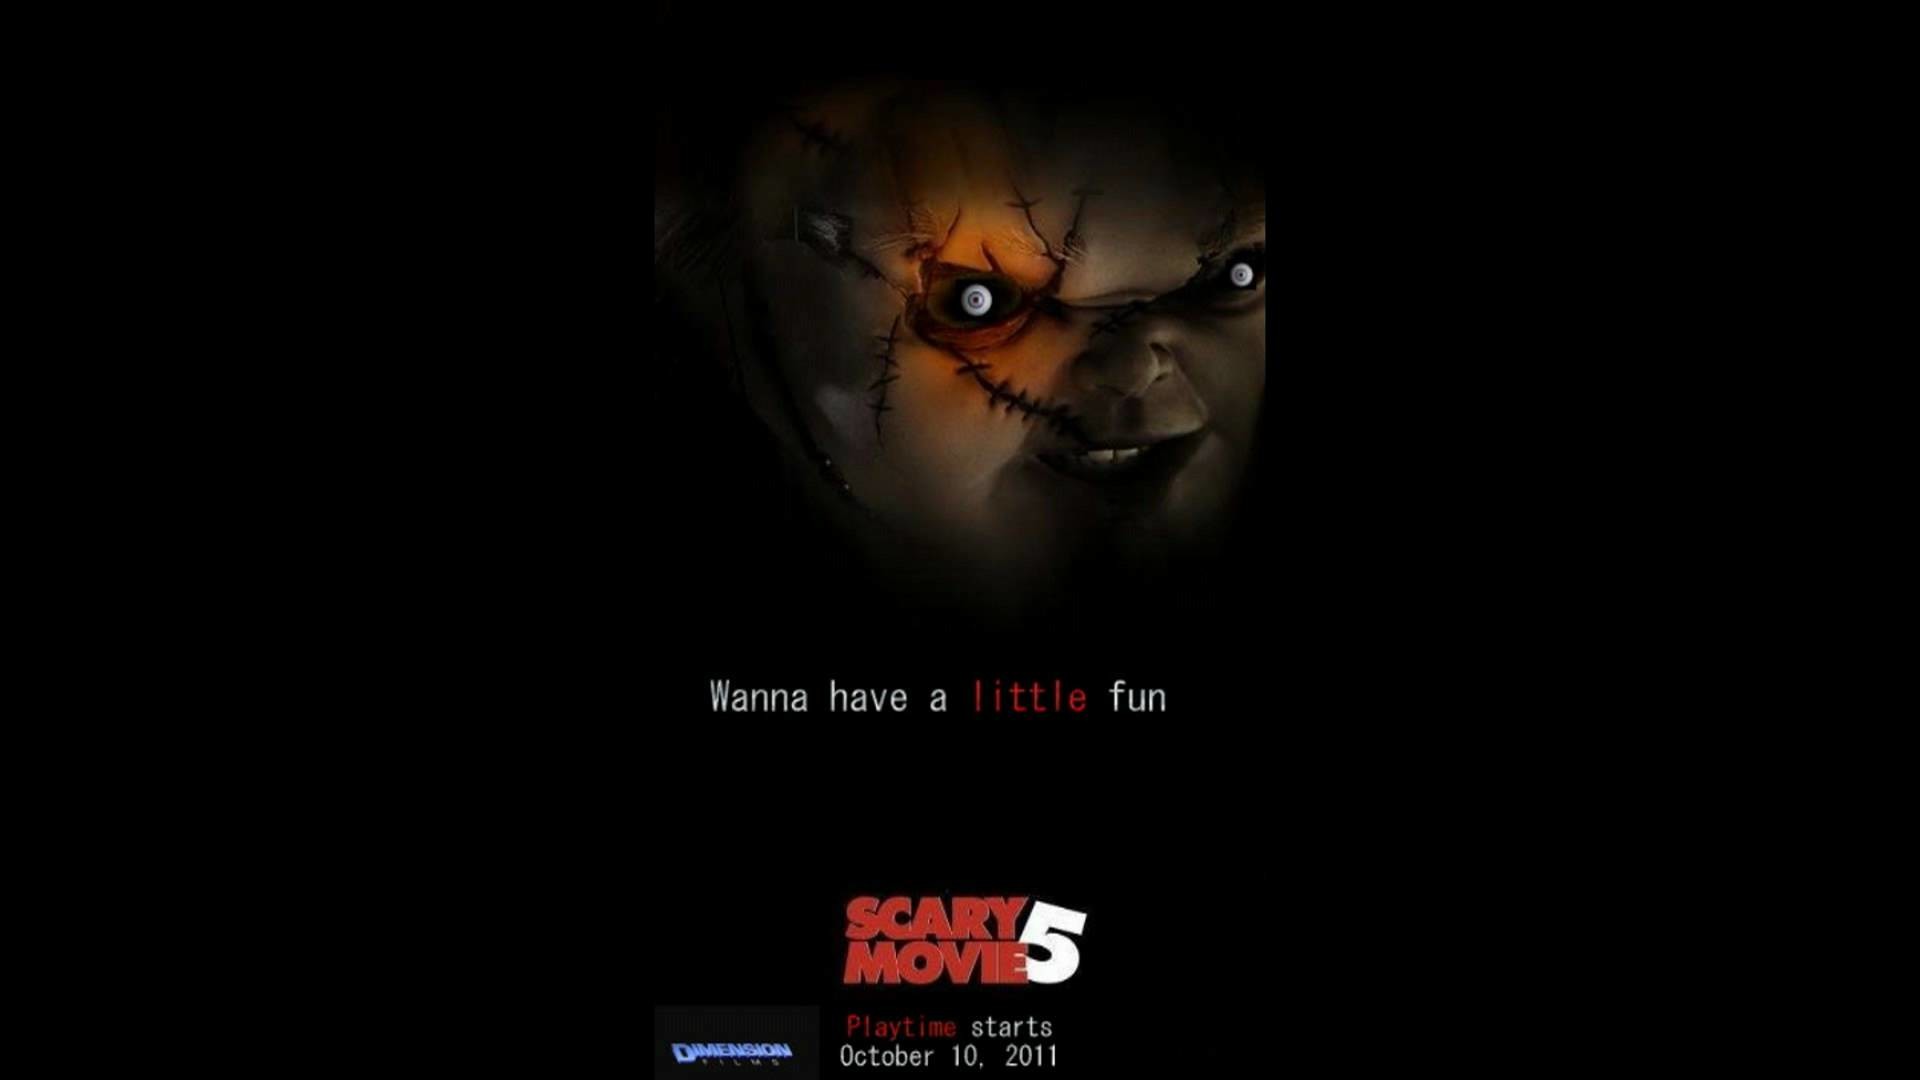 1920x1080 Scary Movie 5 - Seed Of Chucky FAKE spoof poster [05/15/09]